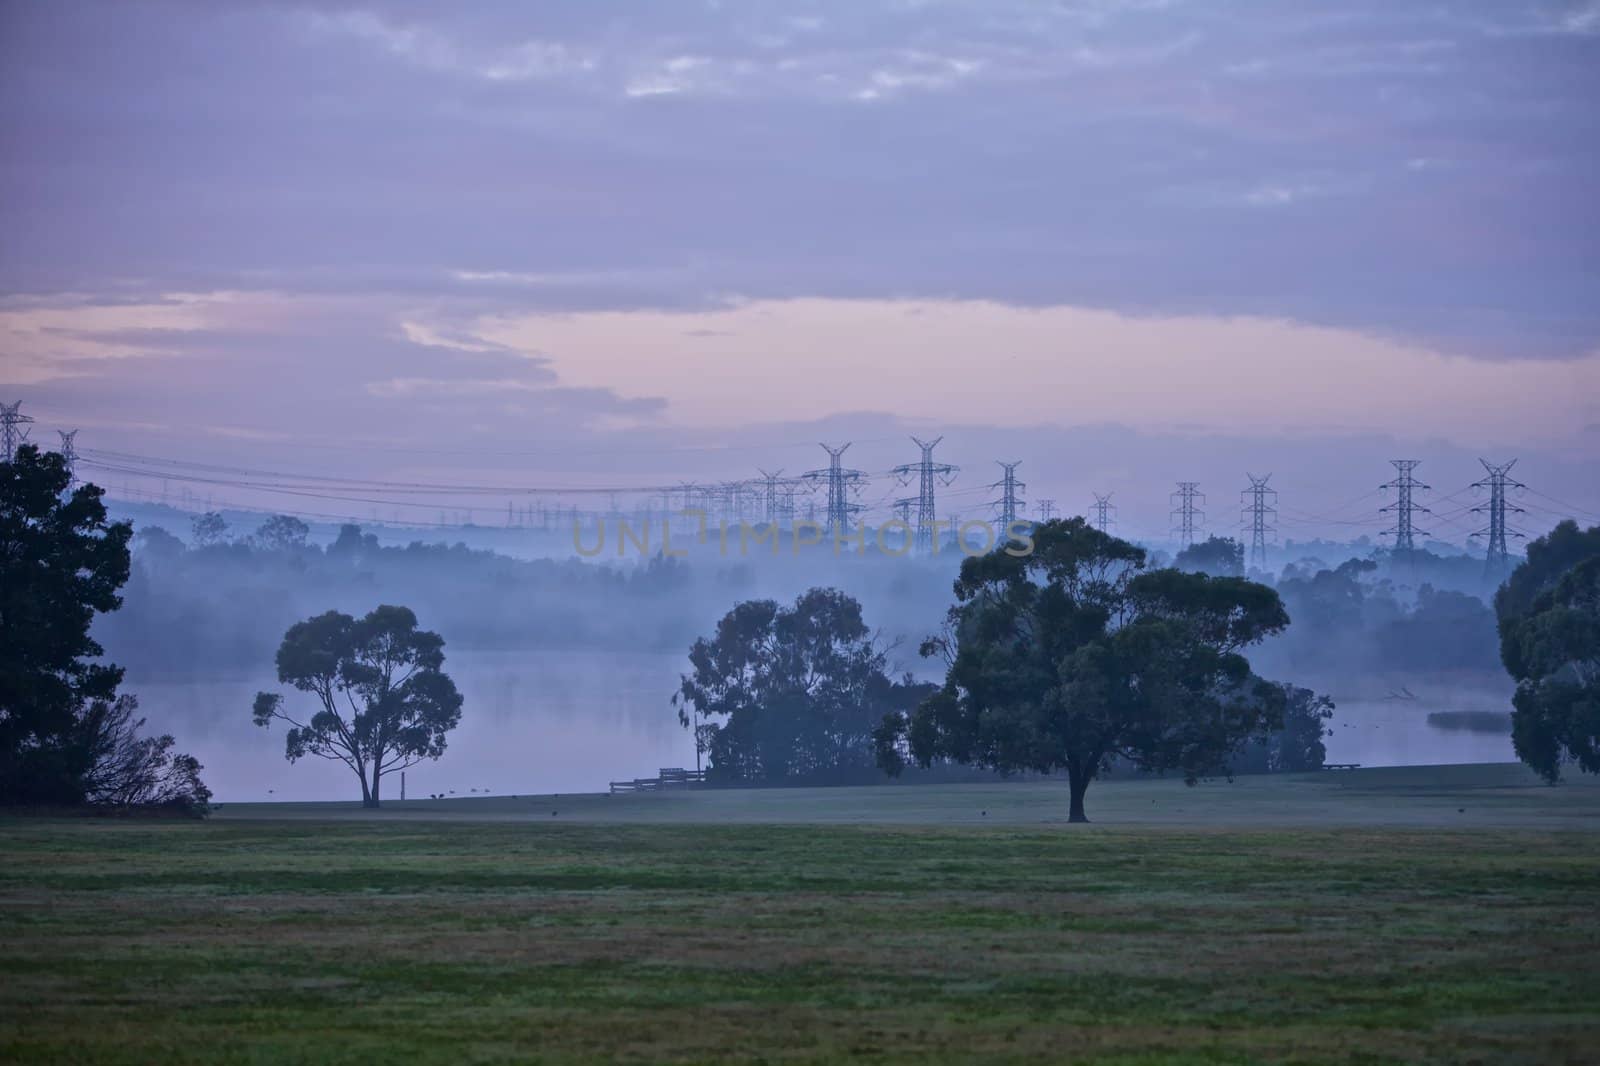 Electrical pylons in morning mist near a pond at the park